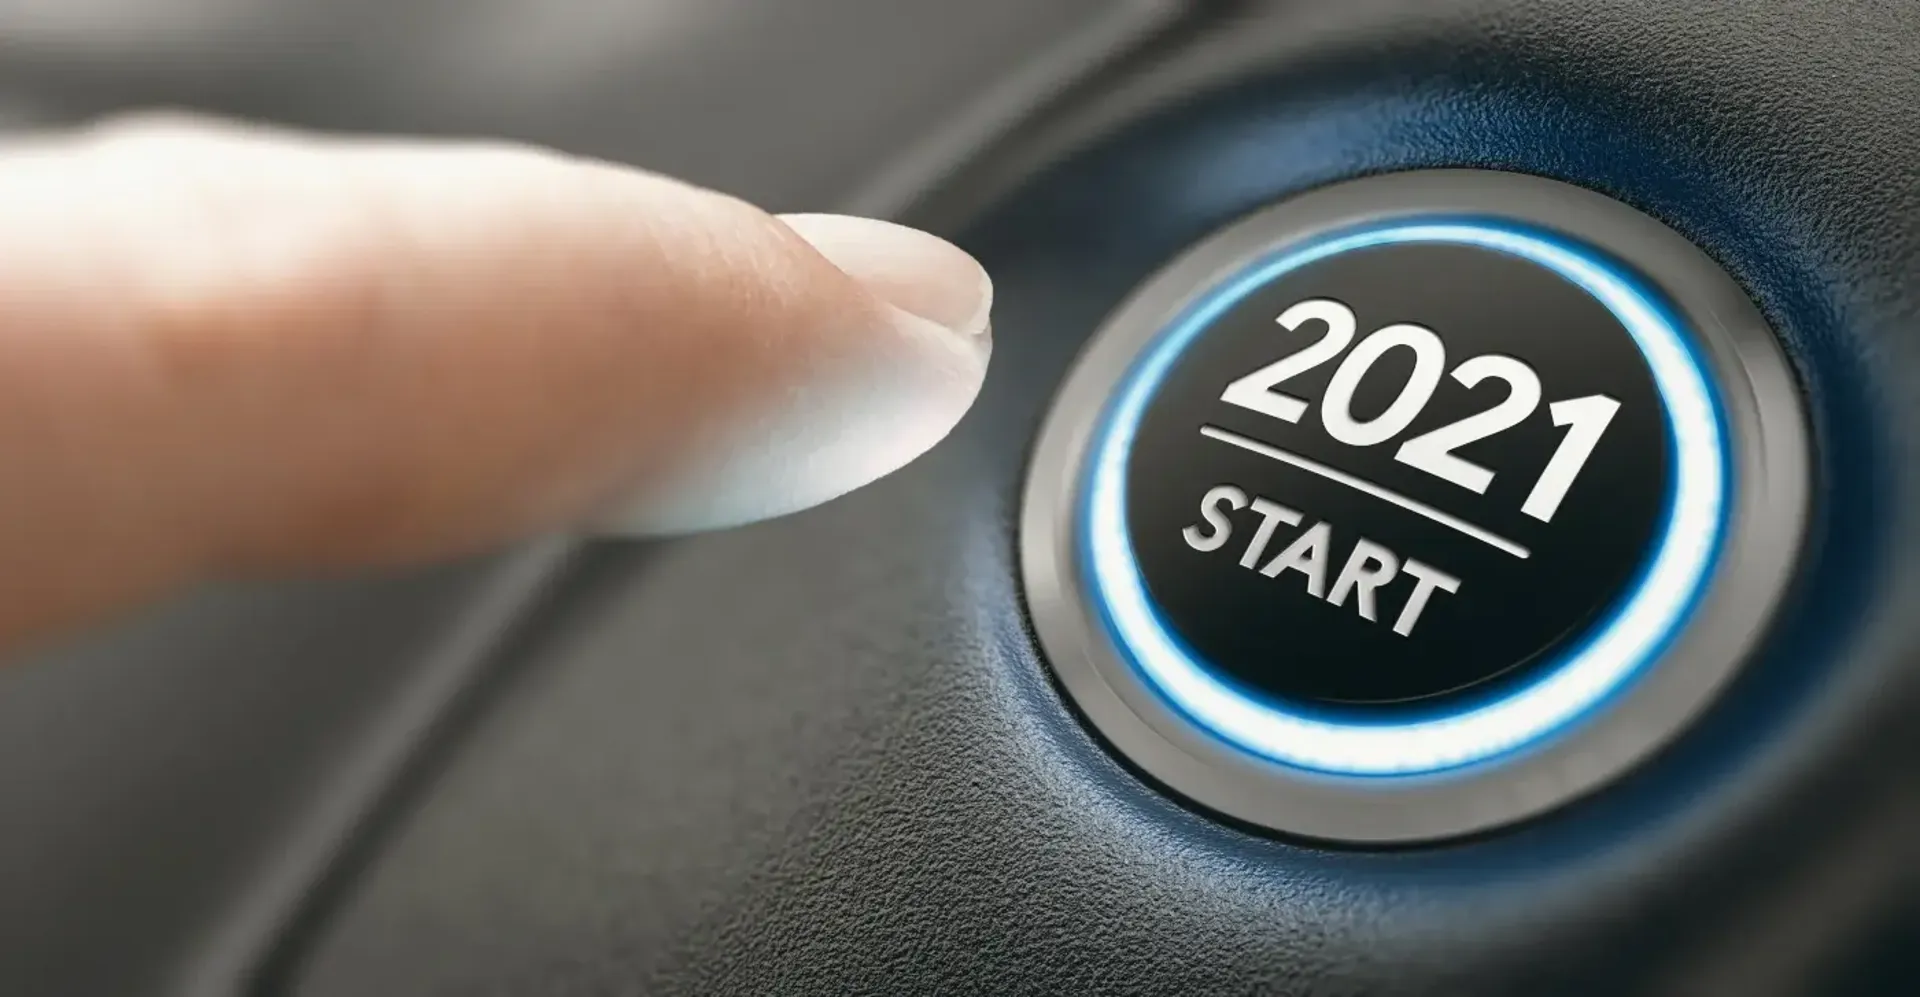 car start stop button with the text '2021 start'